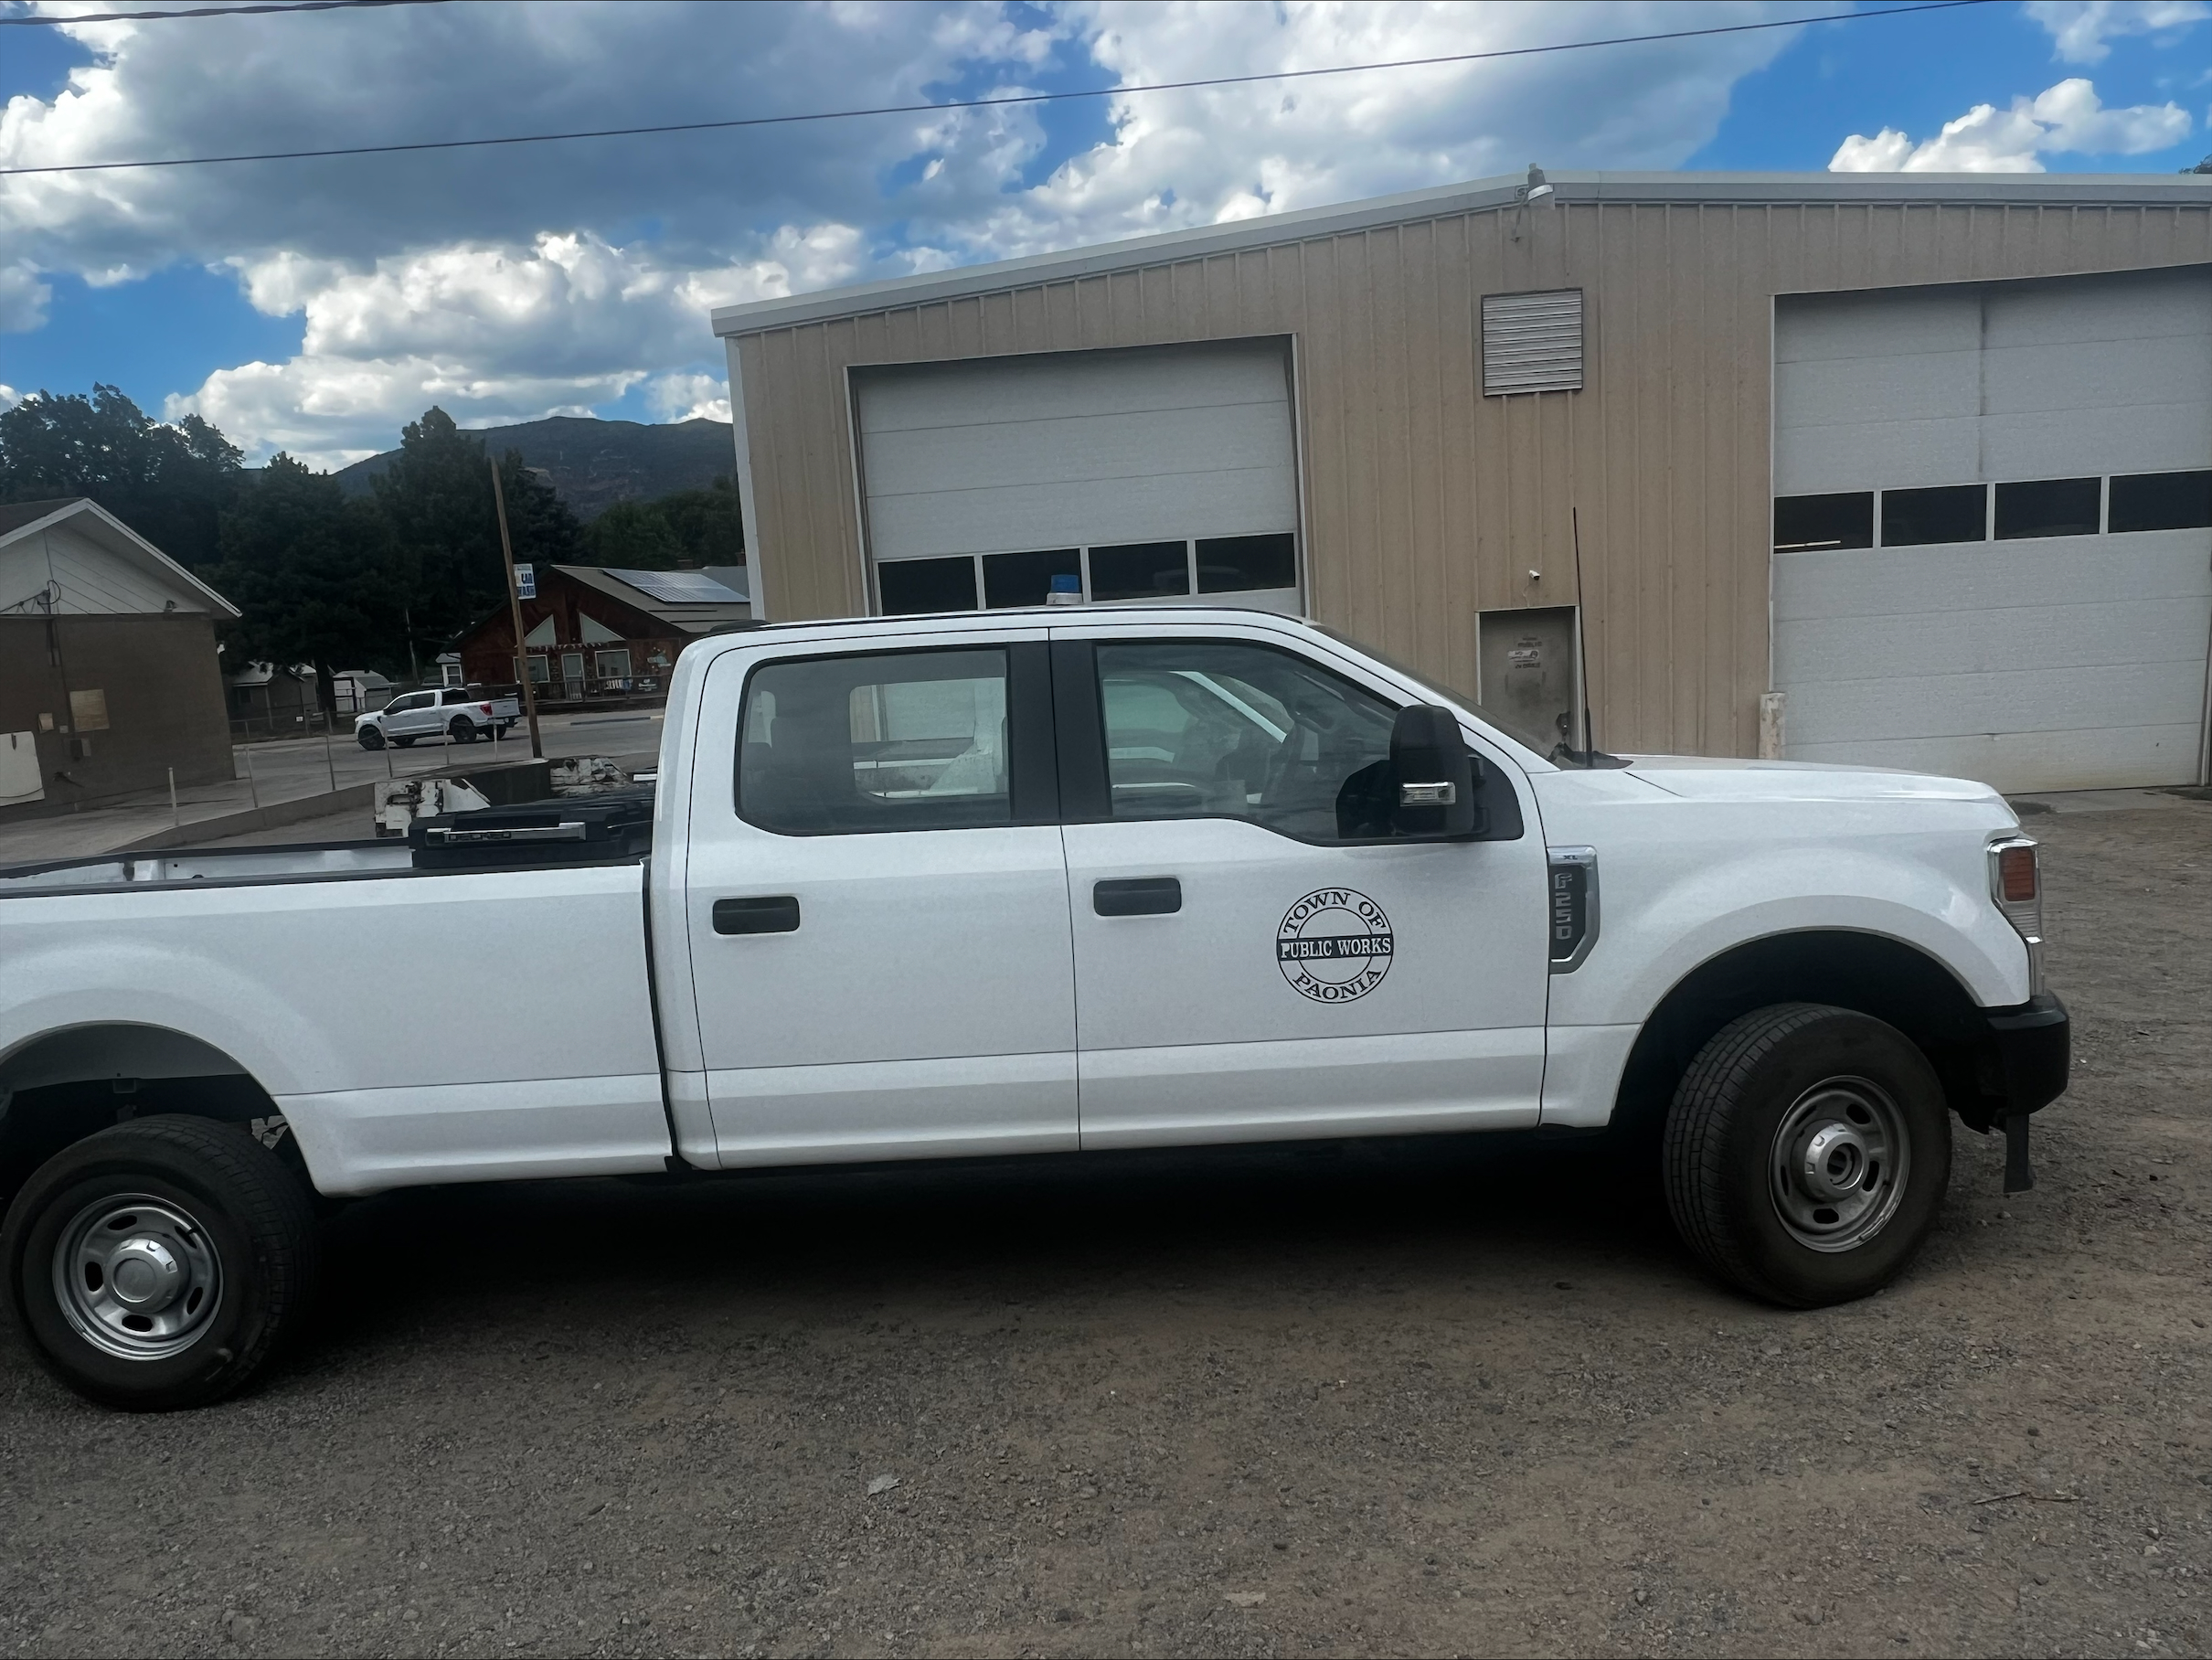 Town of Paonia Public Works (White) Truck Parked in front of Public Works Office Building